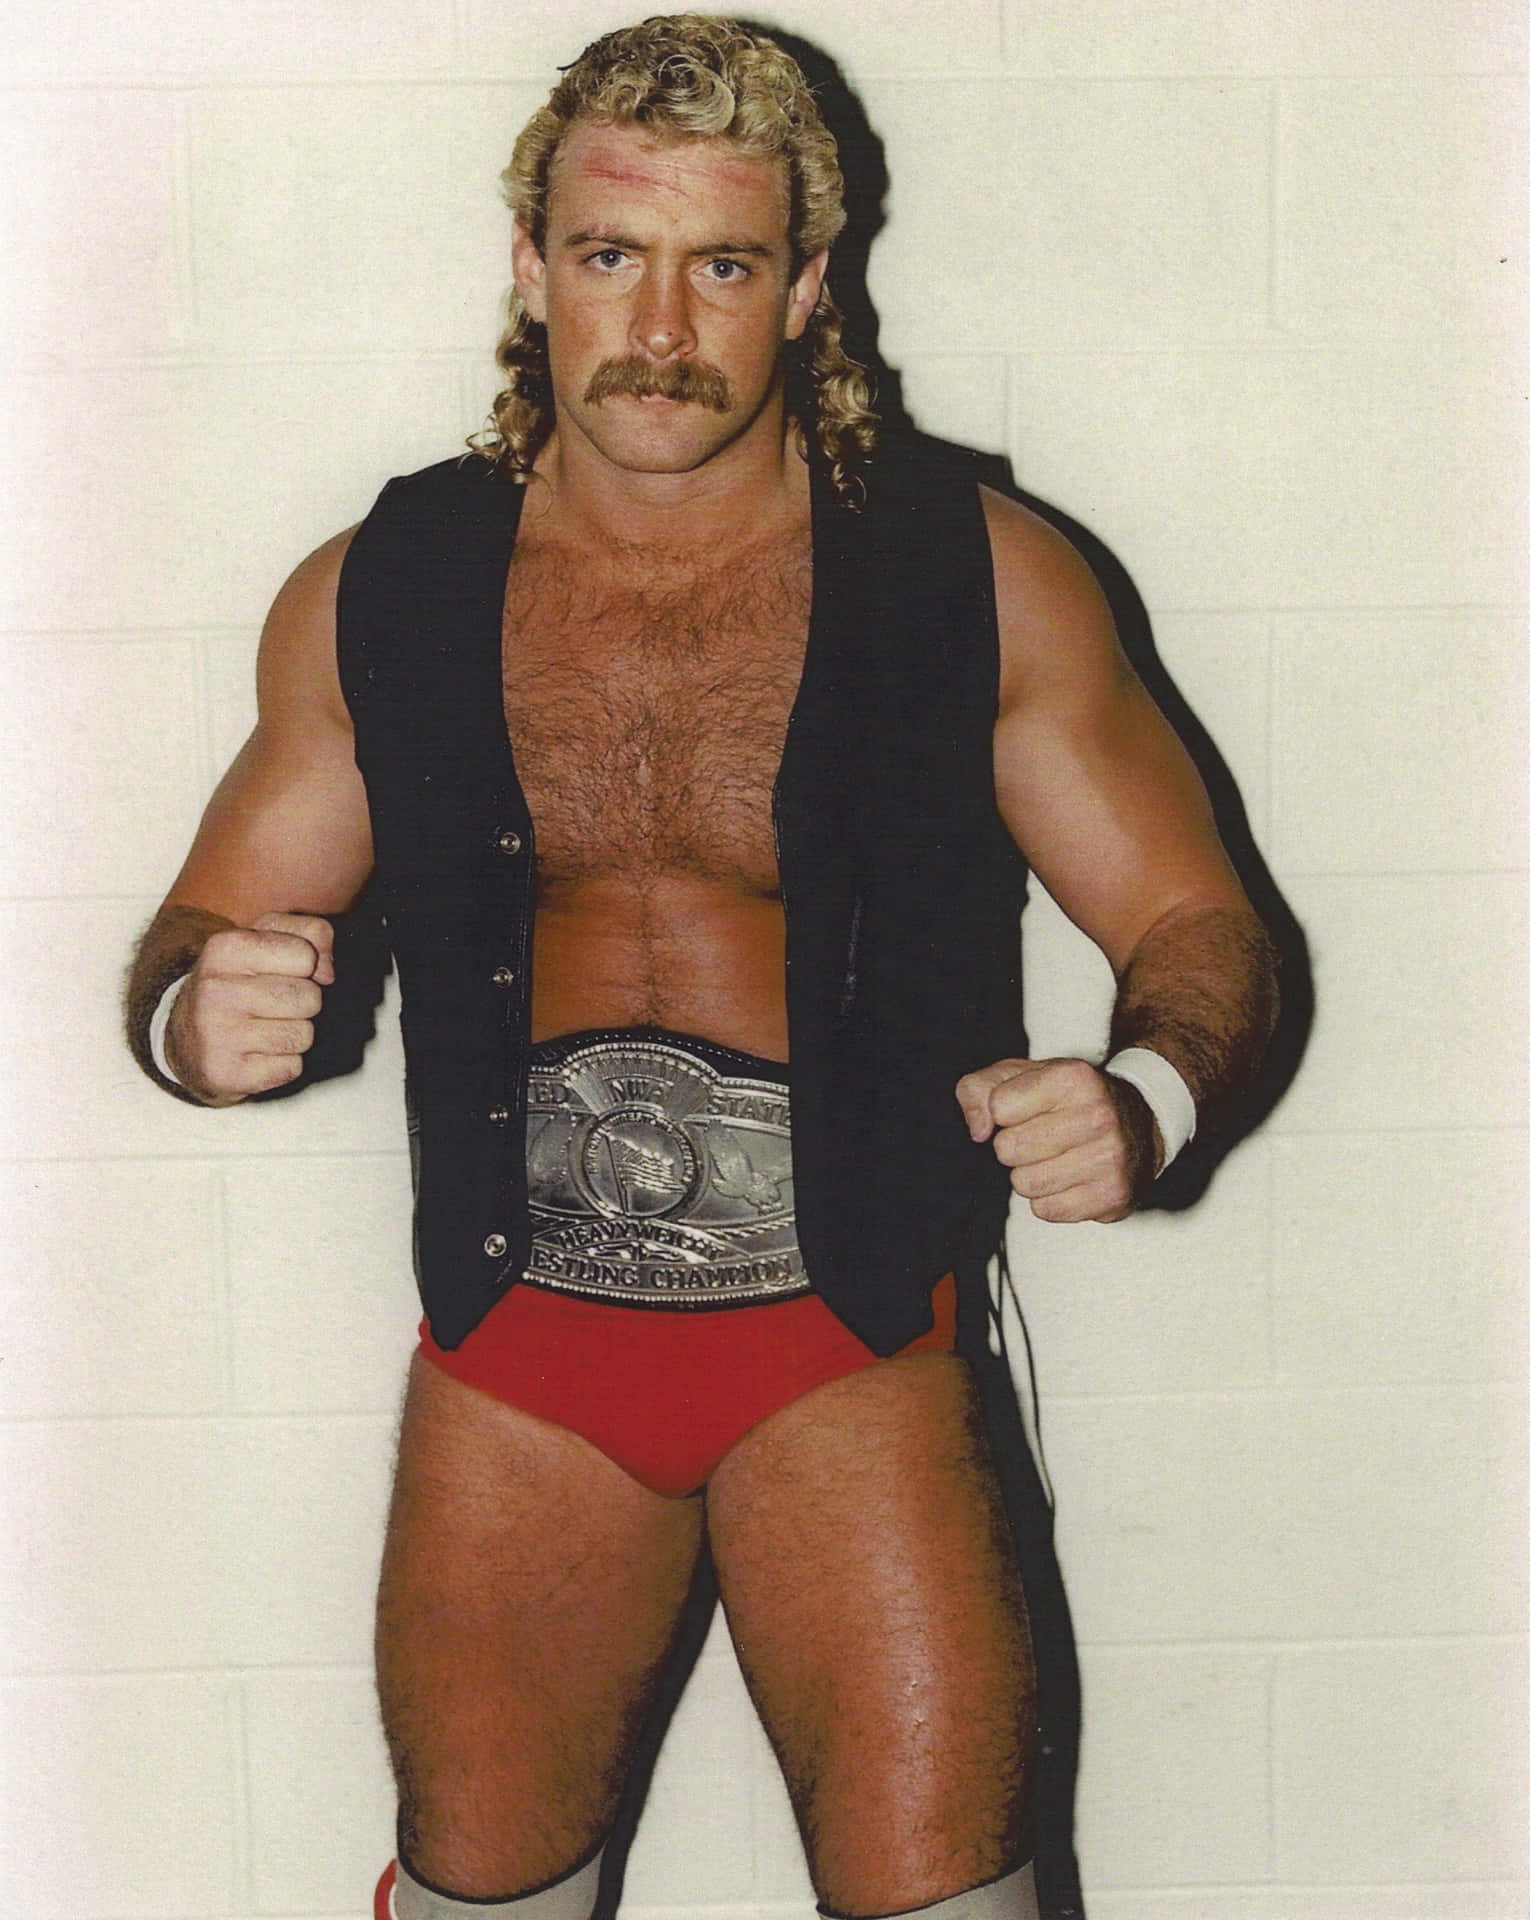 Caption: Magnum TA: An impeccable prowess in American wrestling. Wallpaper